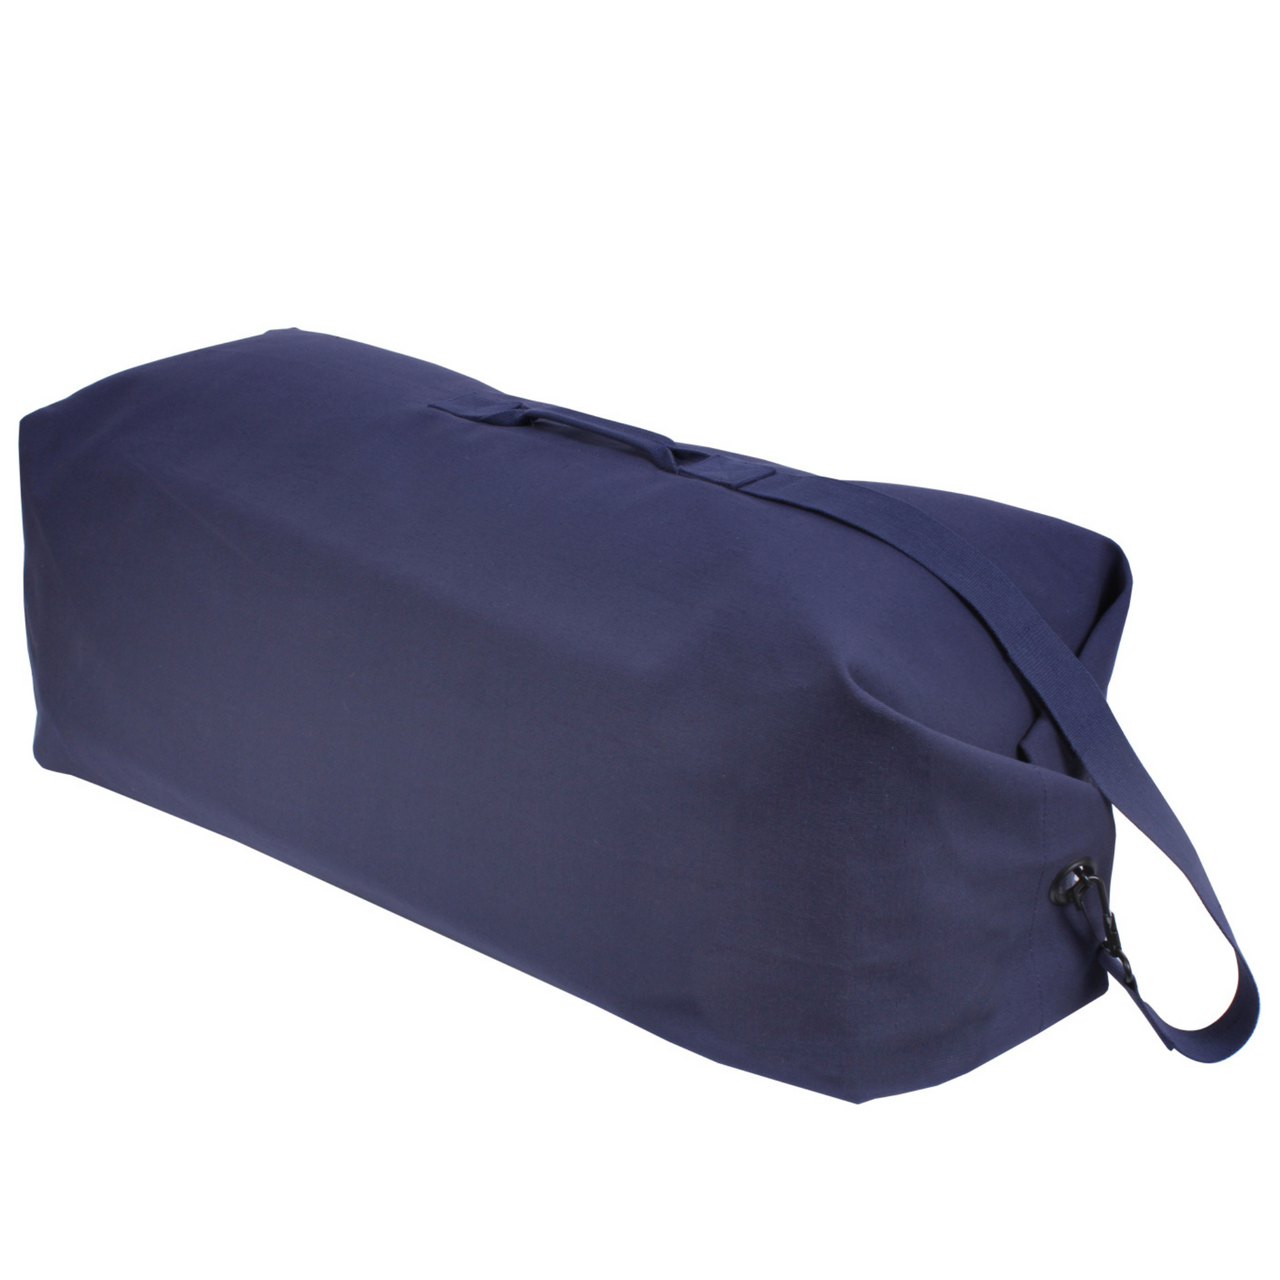 Blue Military Canvas Duffel Bag 32x18 - Army Cargo Style Carryall for